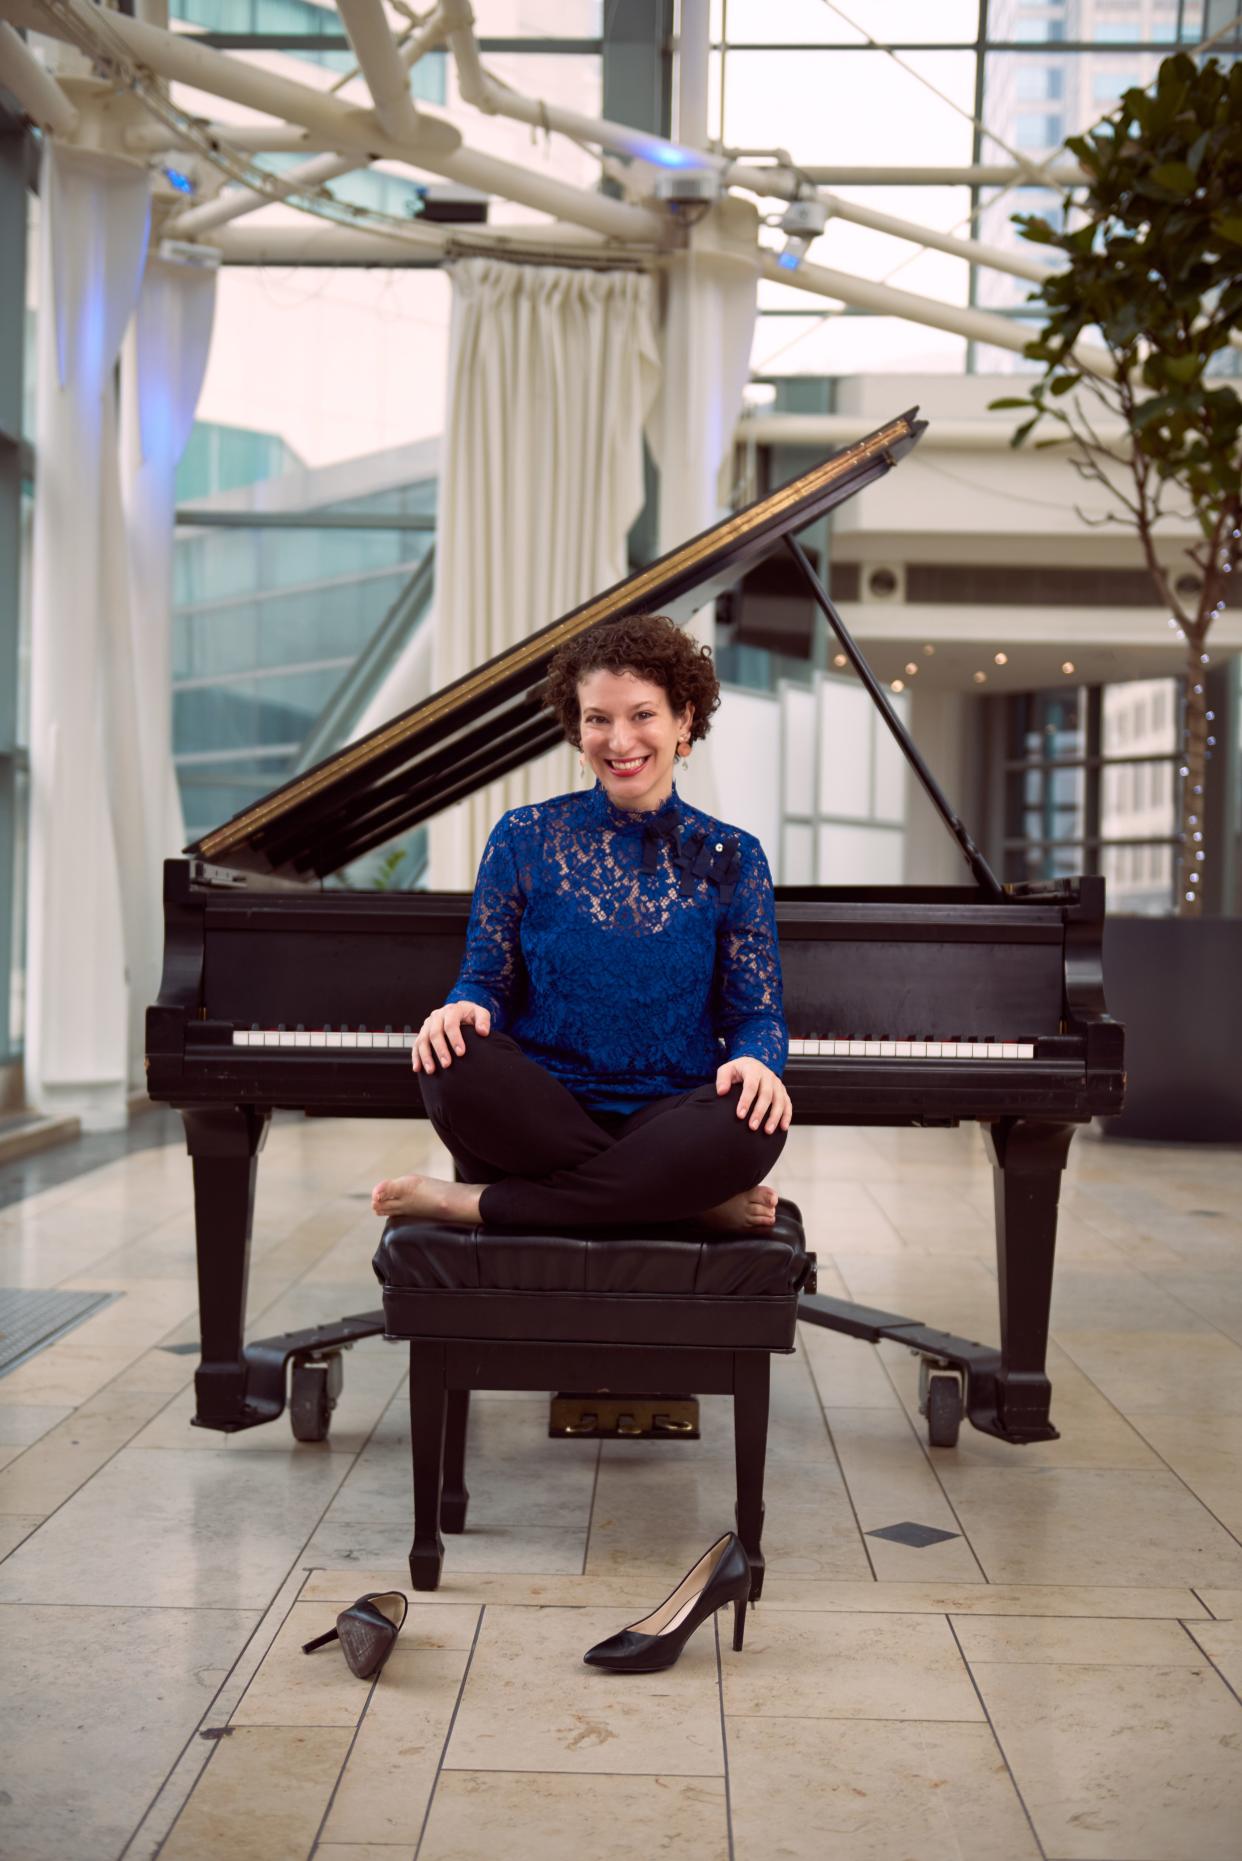 Clare Longendyke, an IU Jacobs School graduate, has released a classical piano album titled “…of dreams unveiled.”